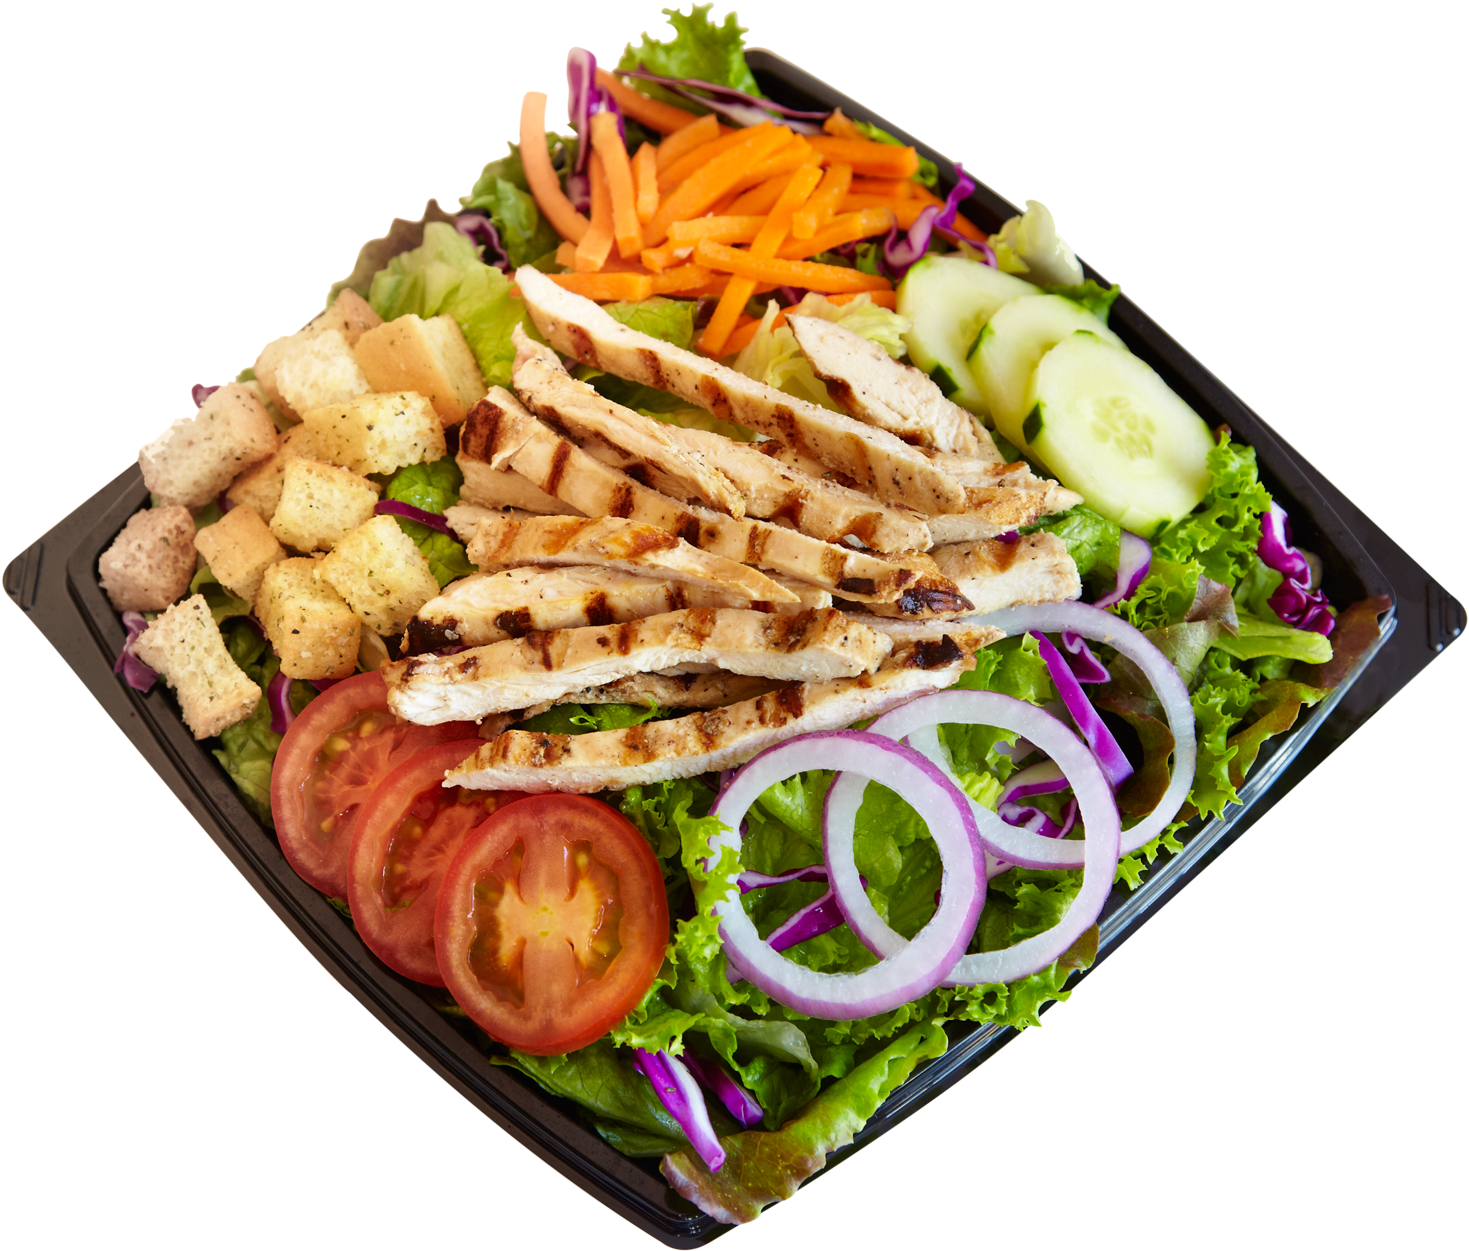 A Salad With Chicken And Vegetables